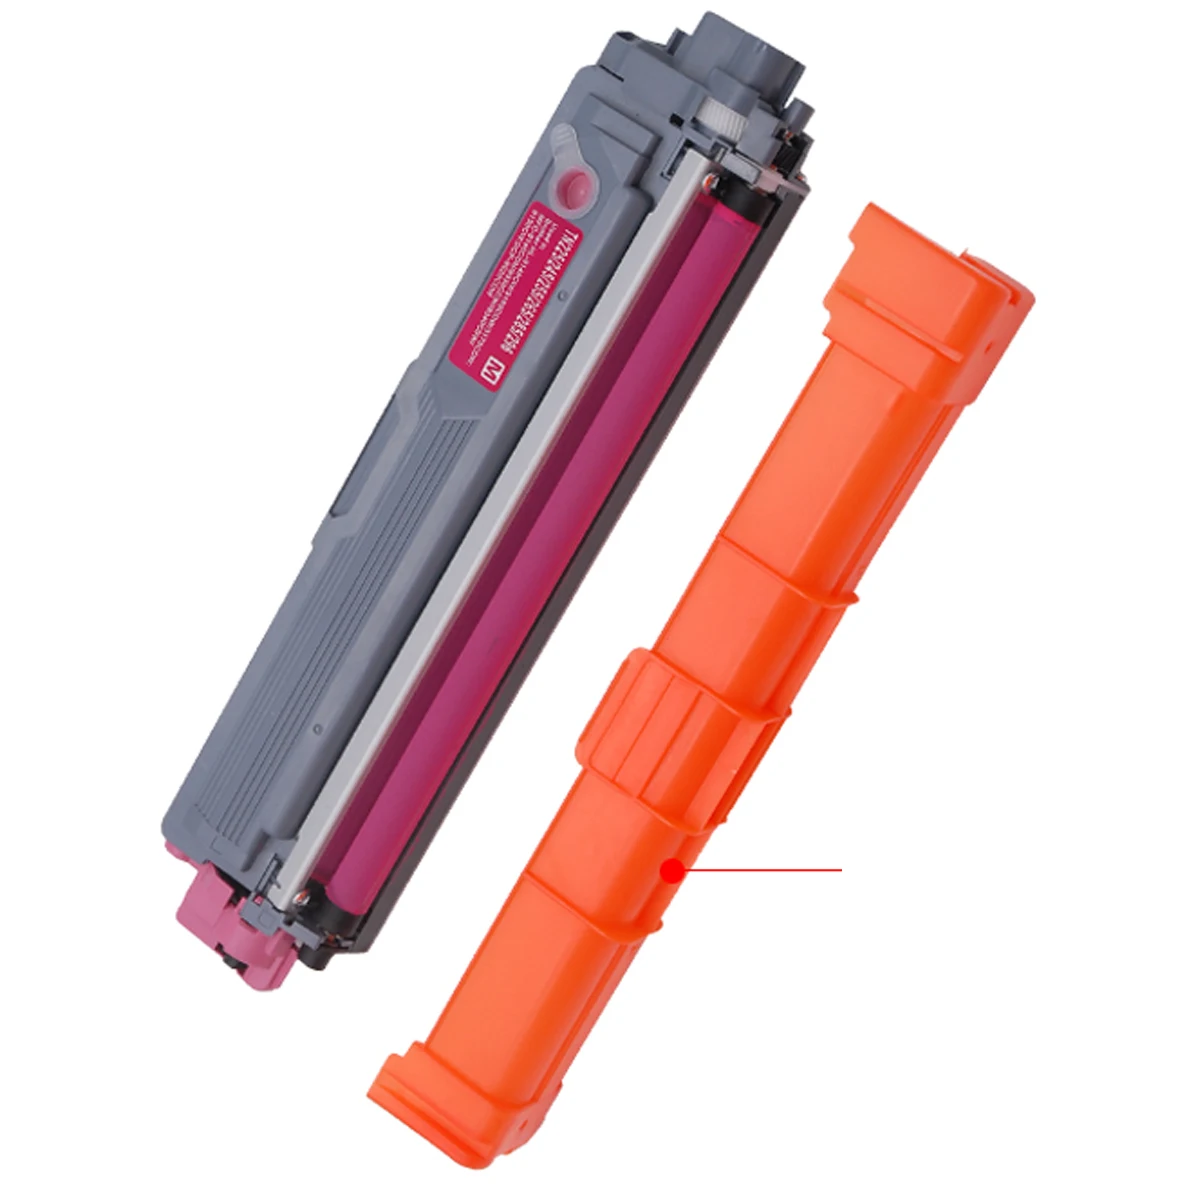 Compatible CMY Toner Cartridge TN241 for Brother Printer  HL3150/3170/DCP9020/MFC9340/9140 - Tianse